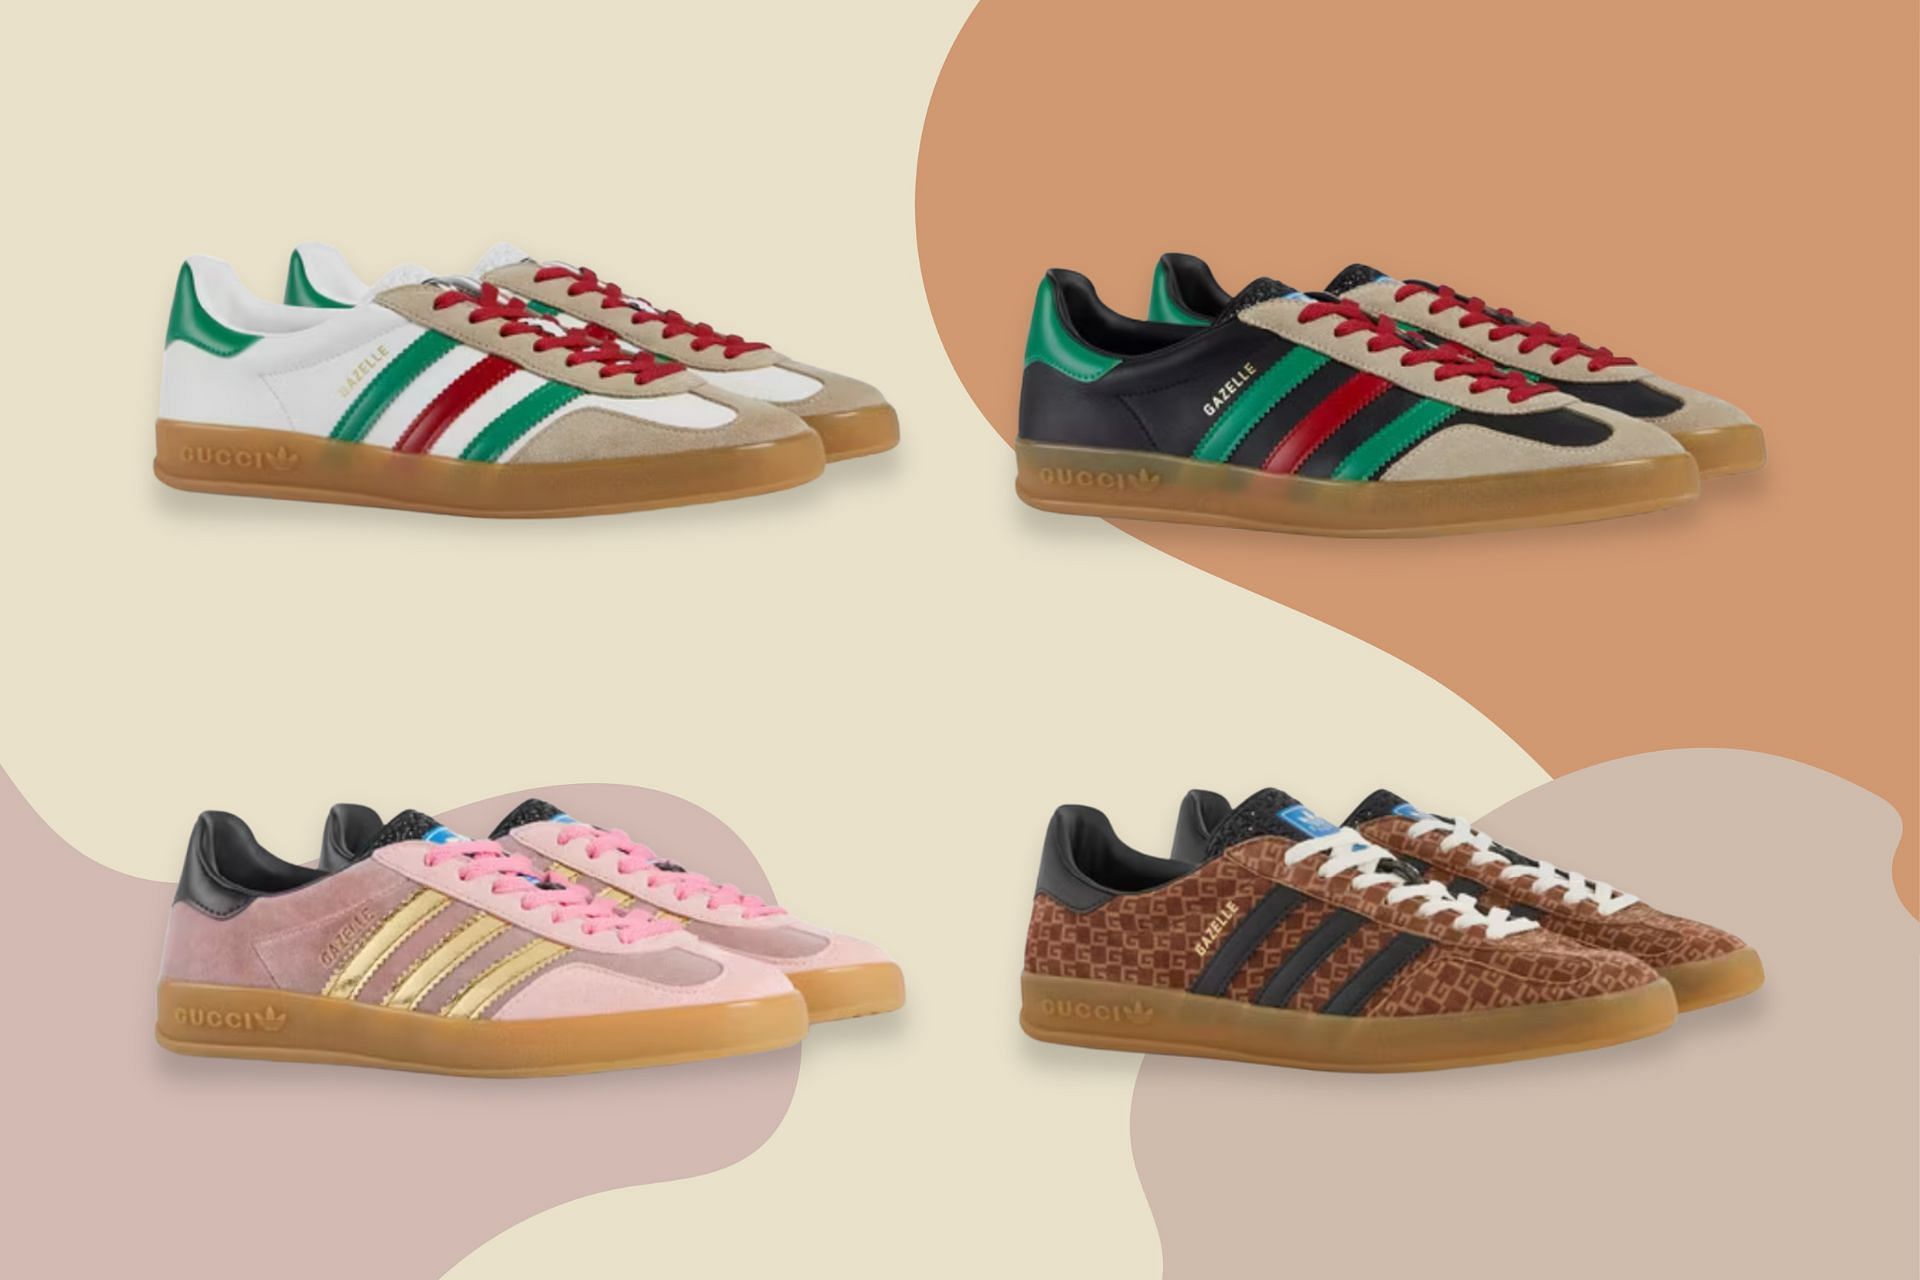 Newly released Fall 2022 Exquisite Gucci x Adidas Gazelle sneakers (Image via Sportskeeda)